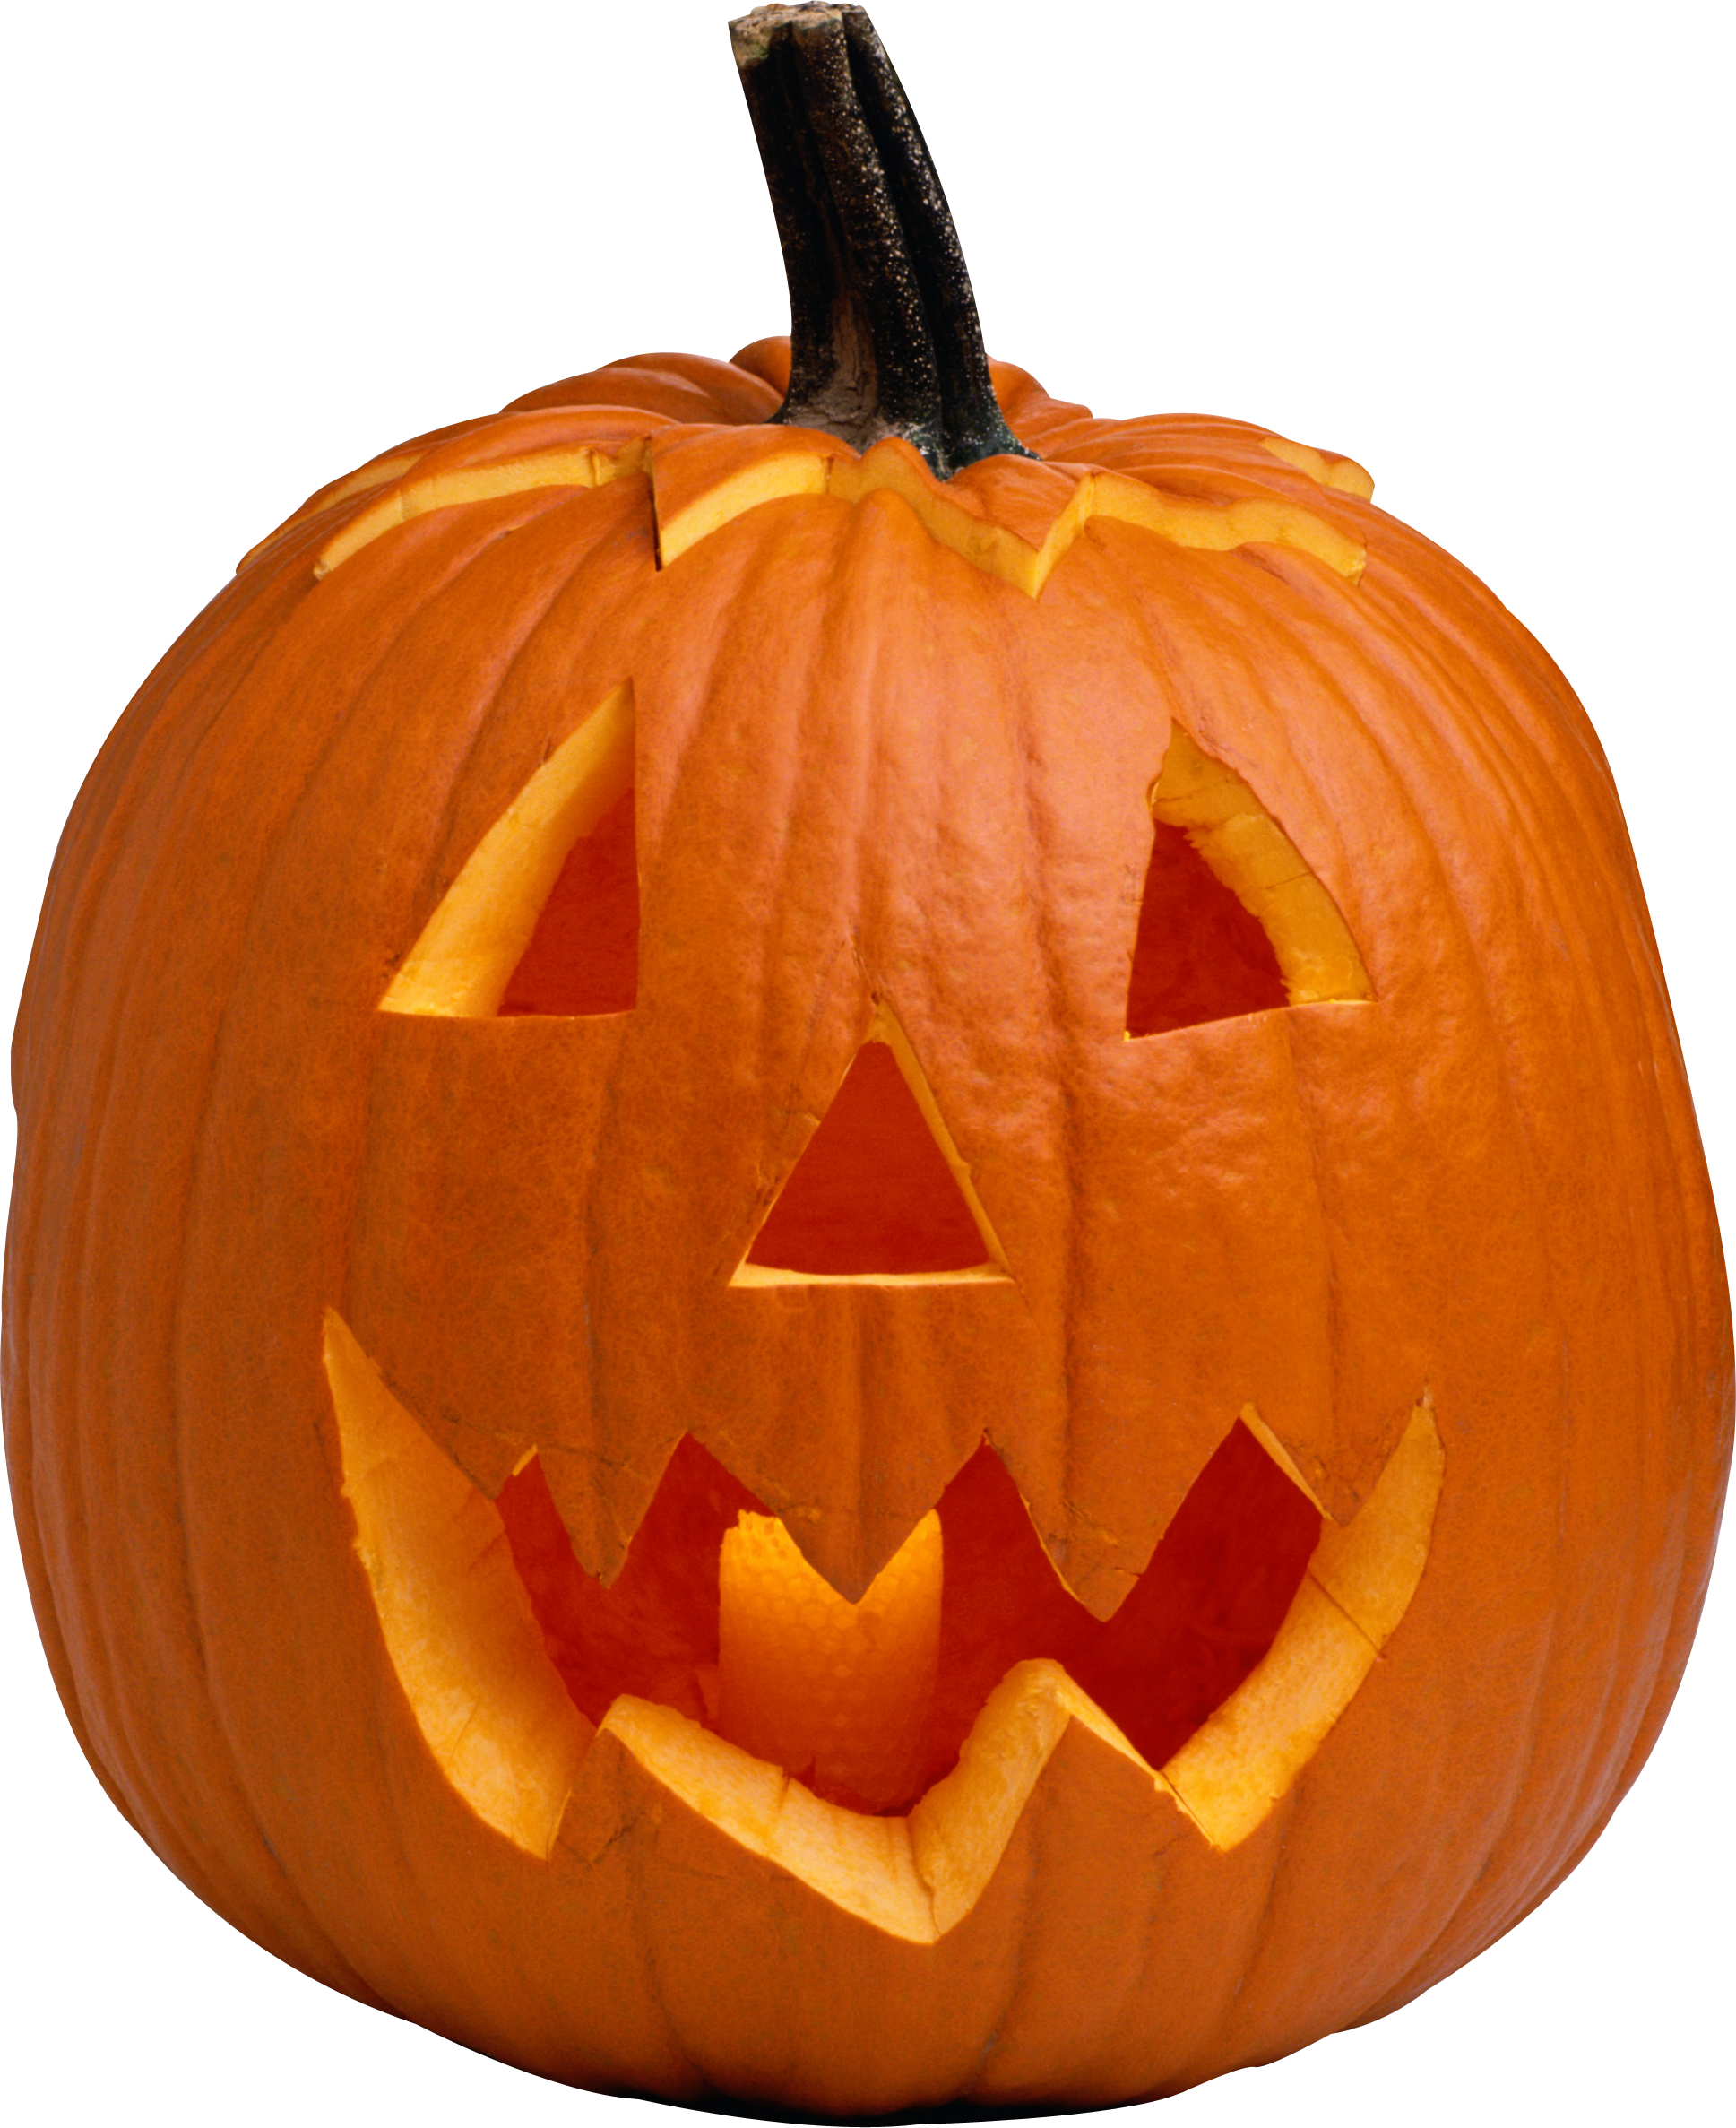 Halloween Carved Pumpkin PNG High-Quality Image